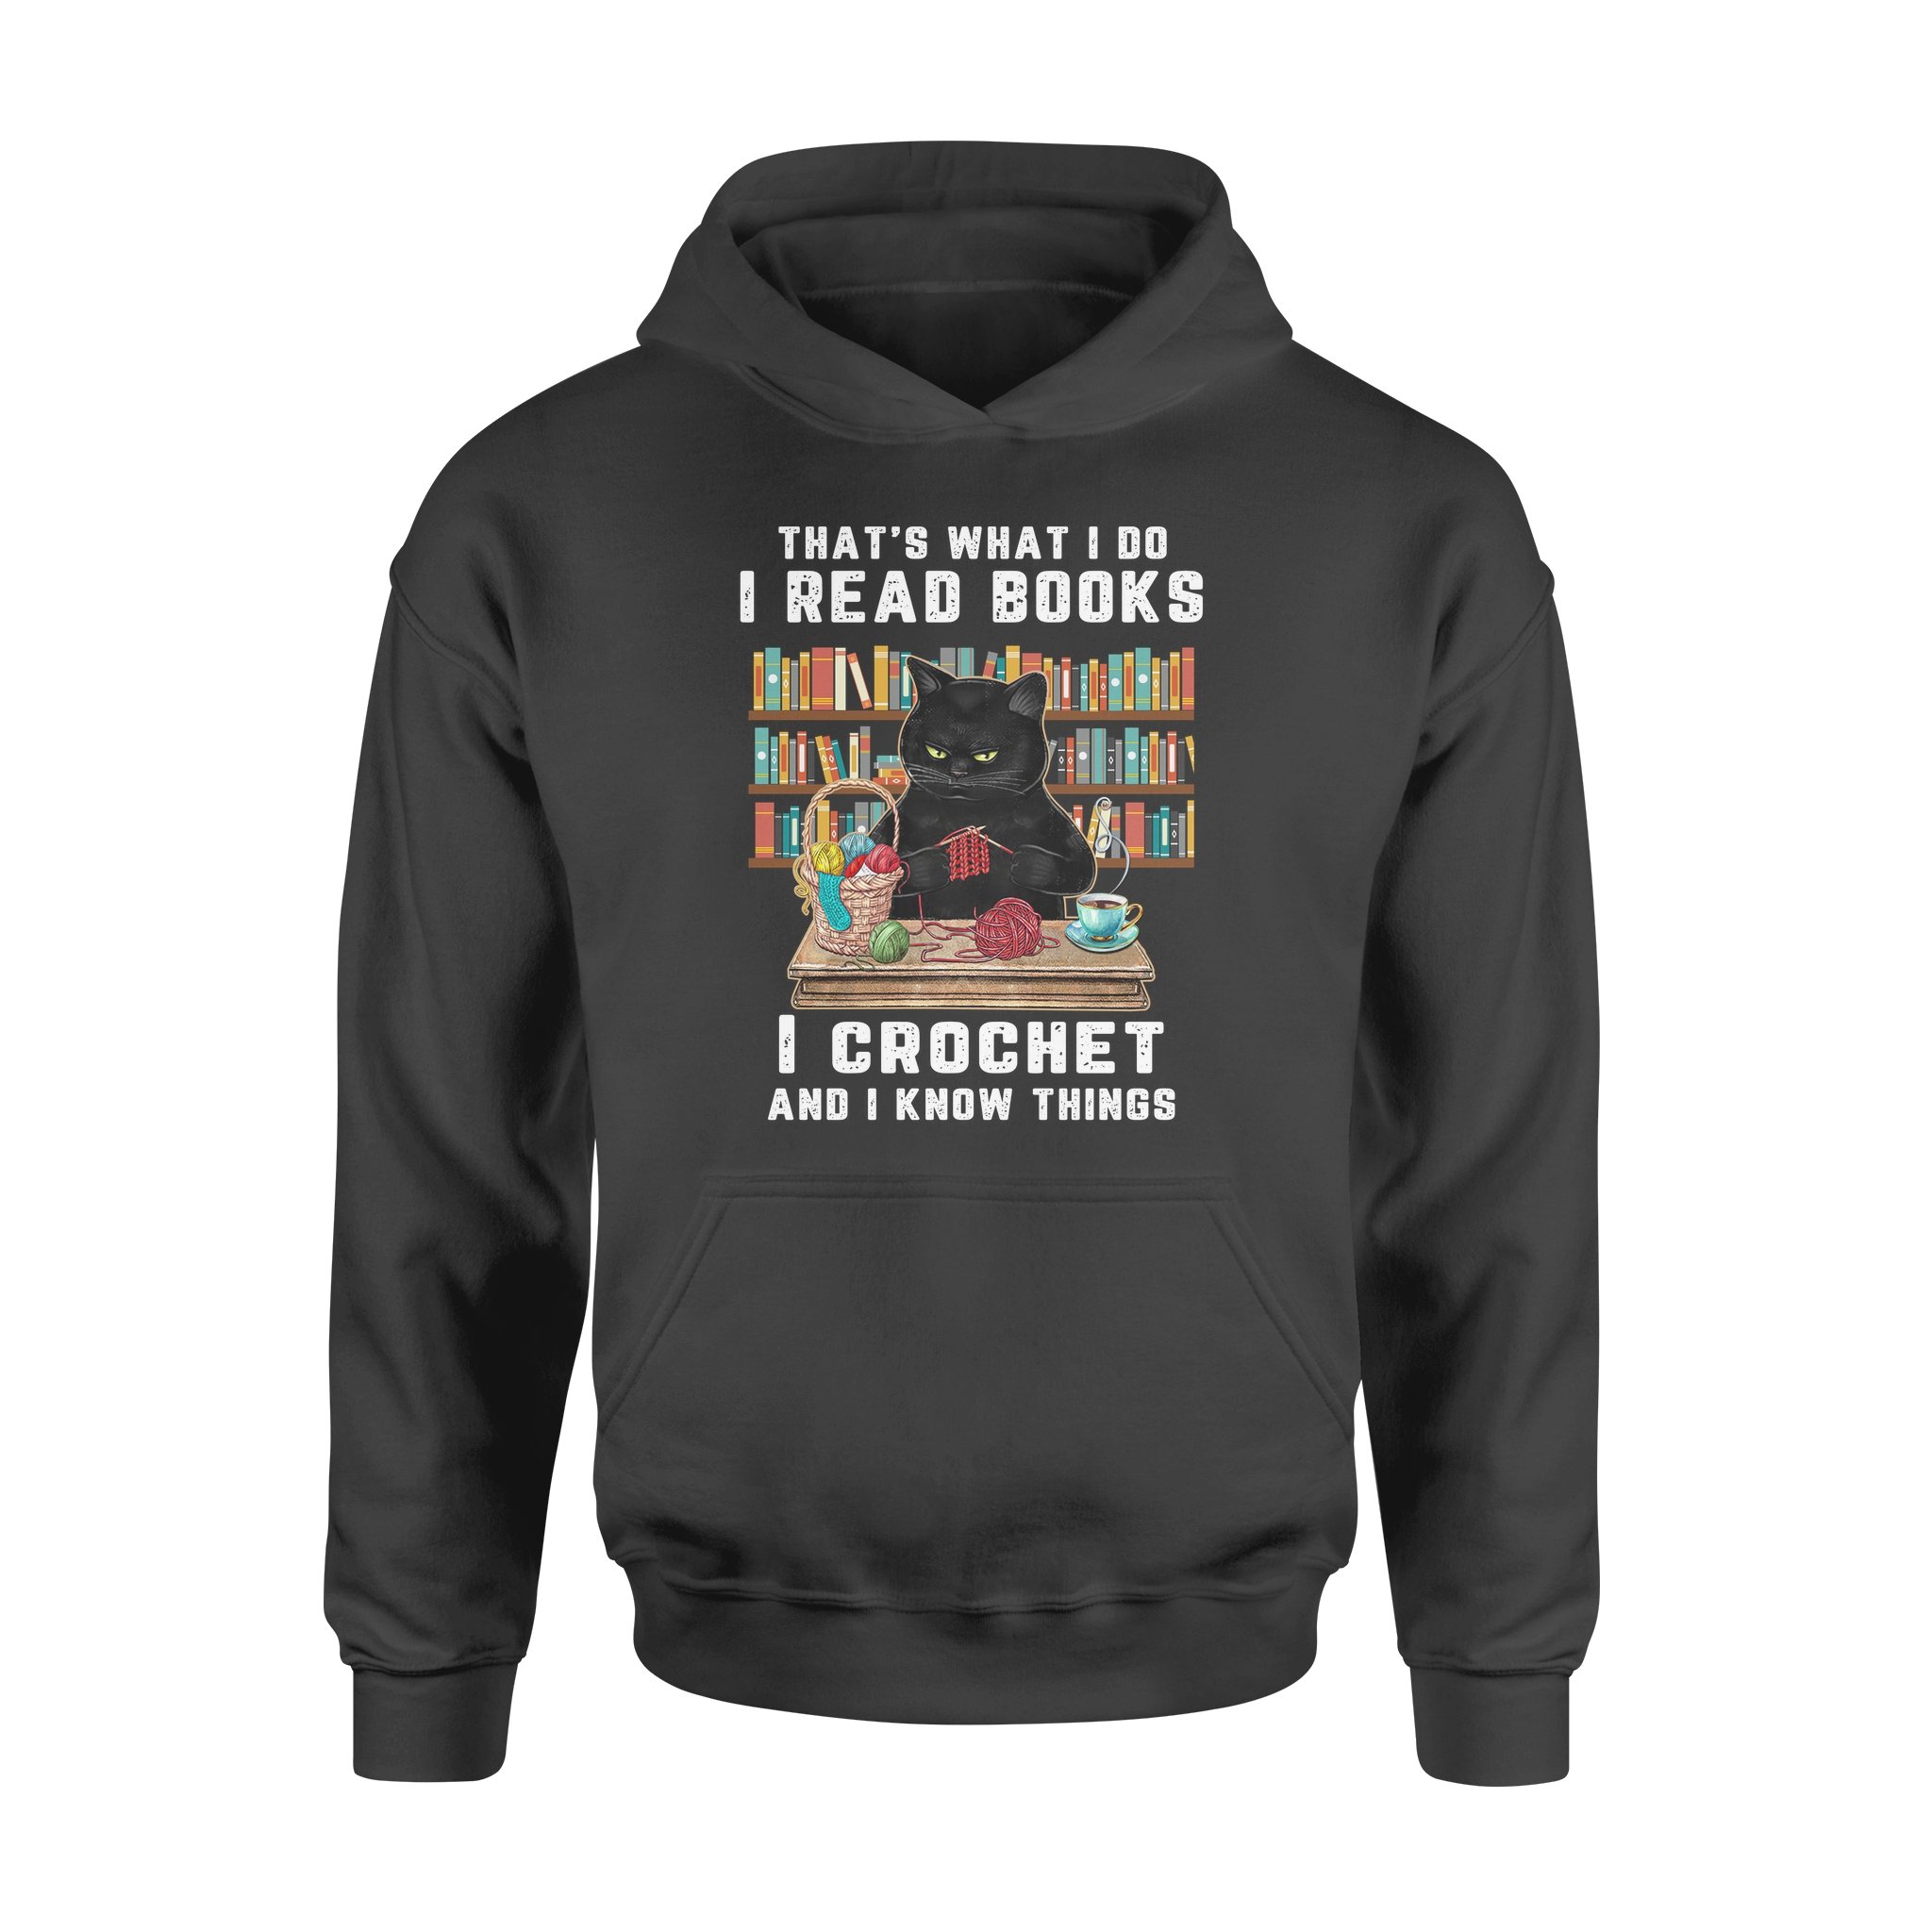 Black Cat Crochet That’s What I Do I Read Books And I Know Things Shirt – Standard Hoodie